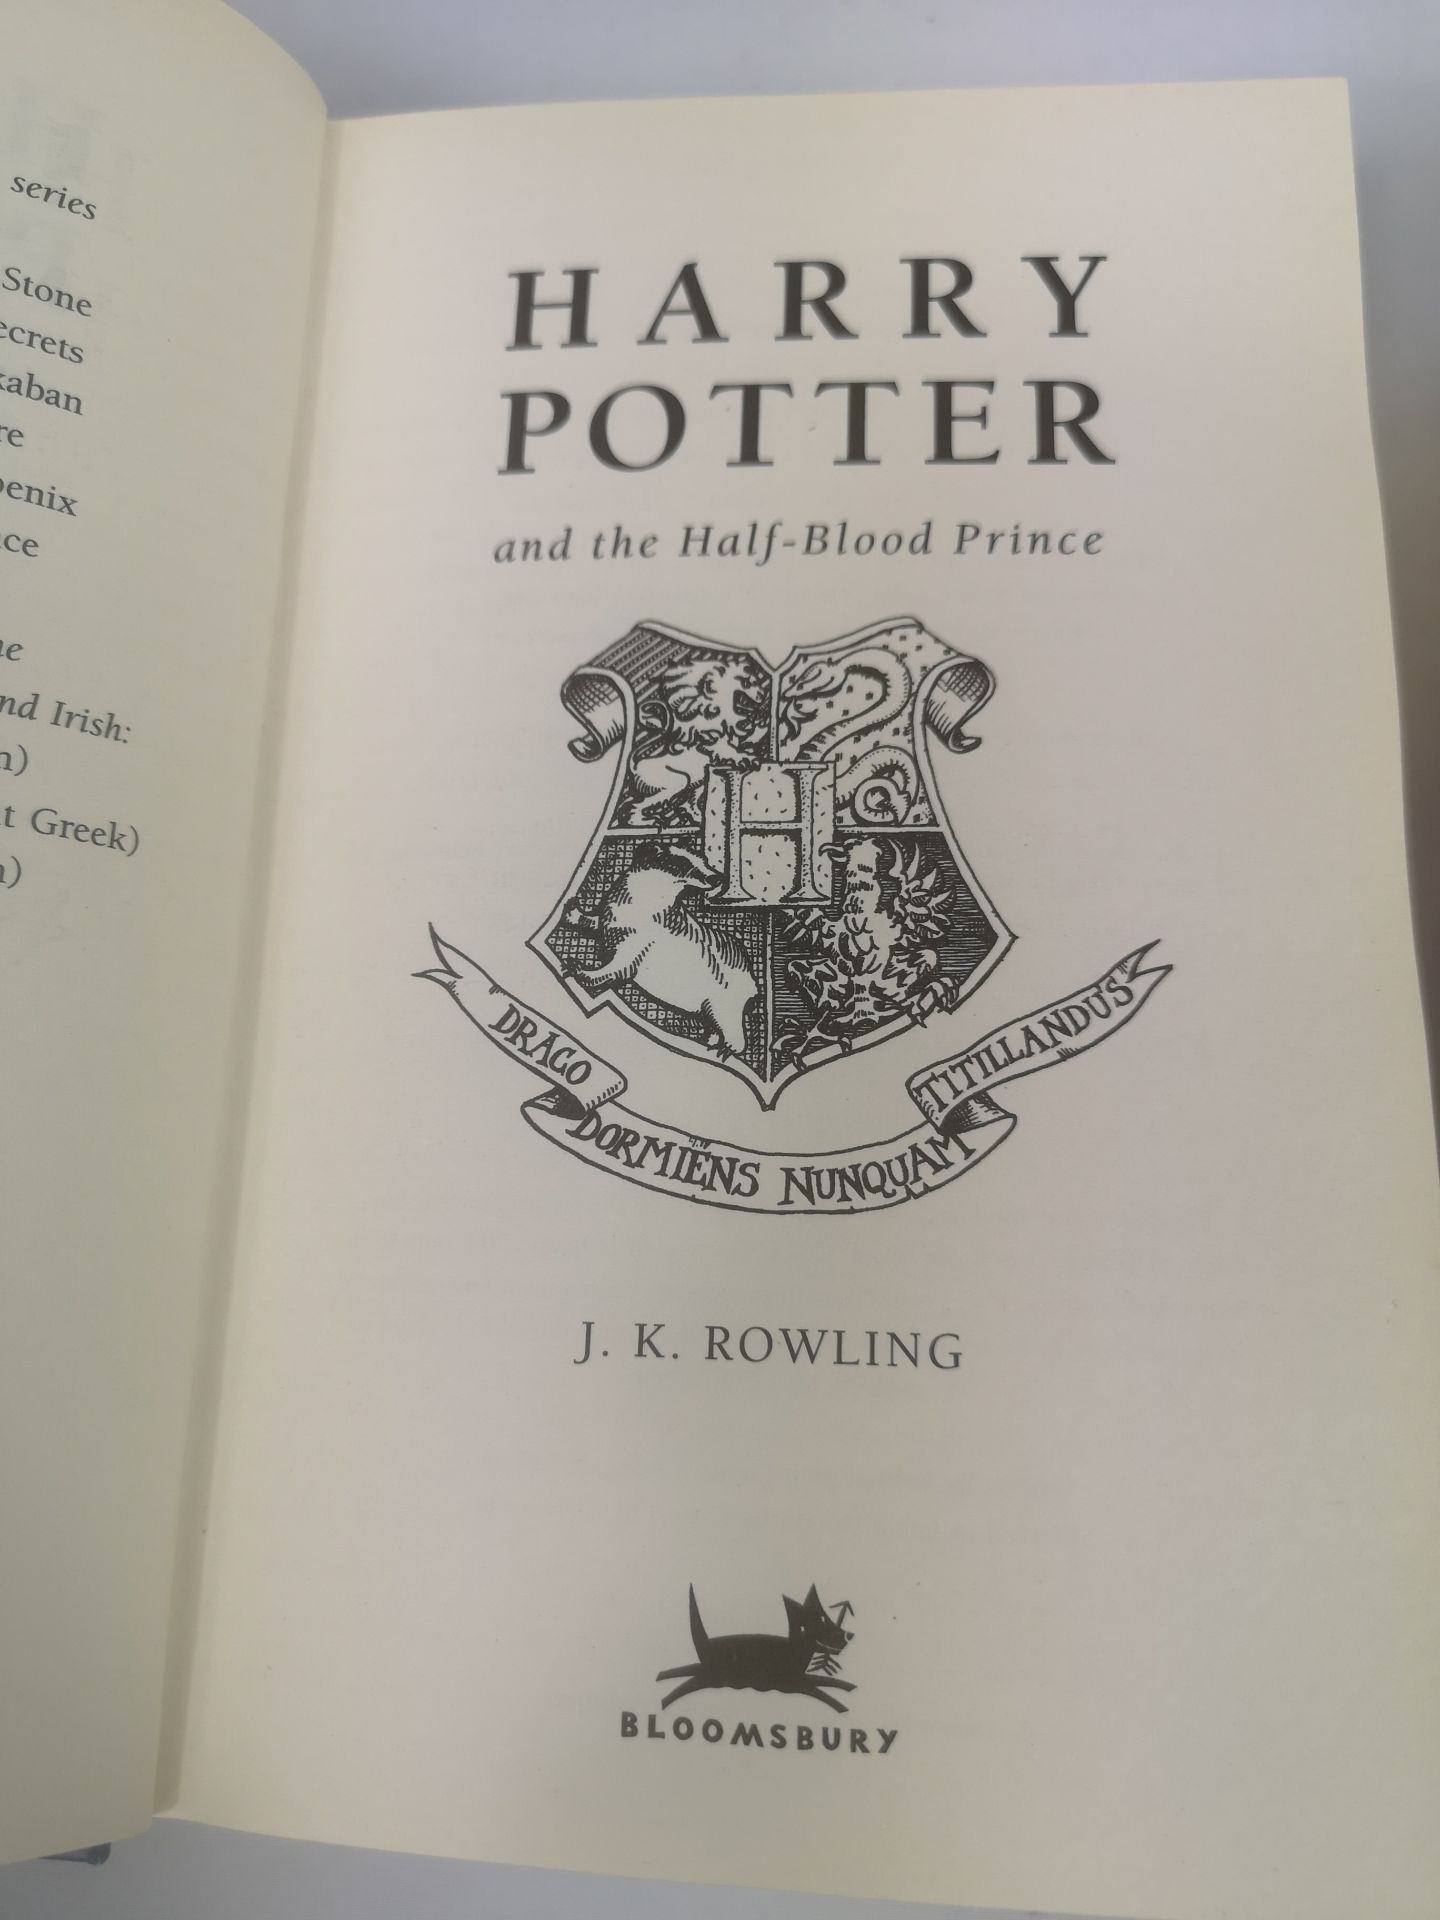 Two Harry Potter first editions - Image 2 of 6